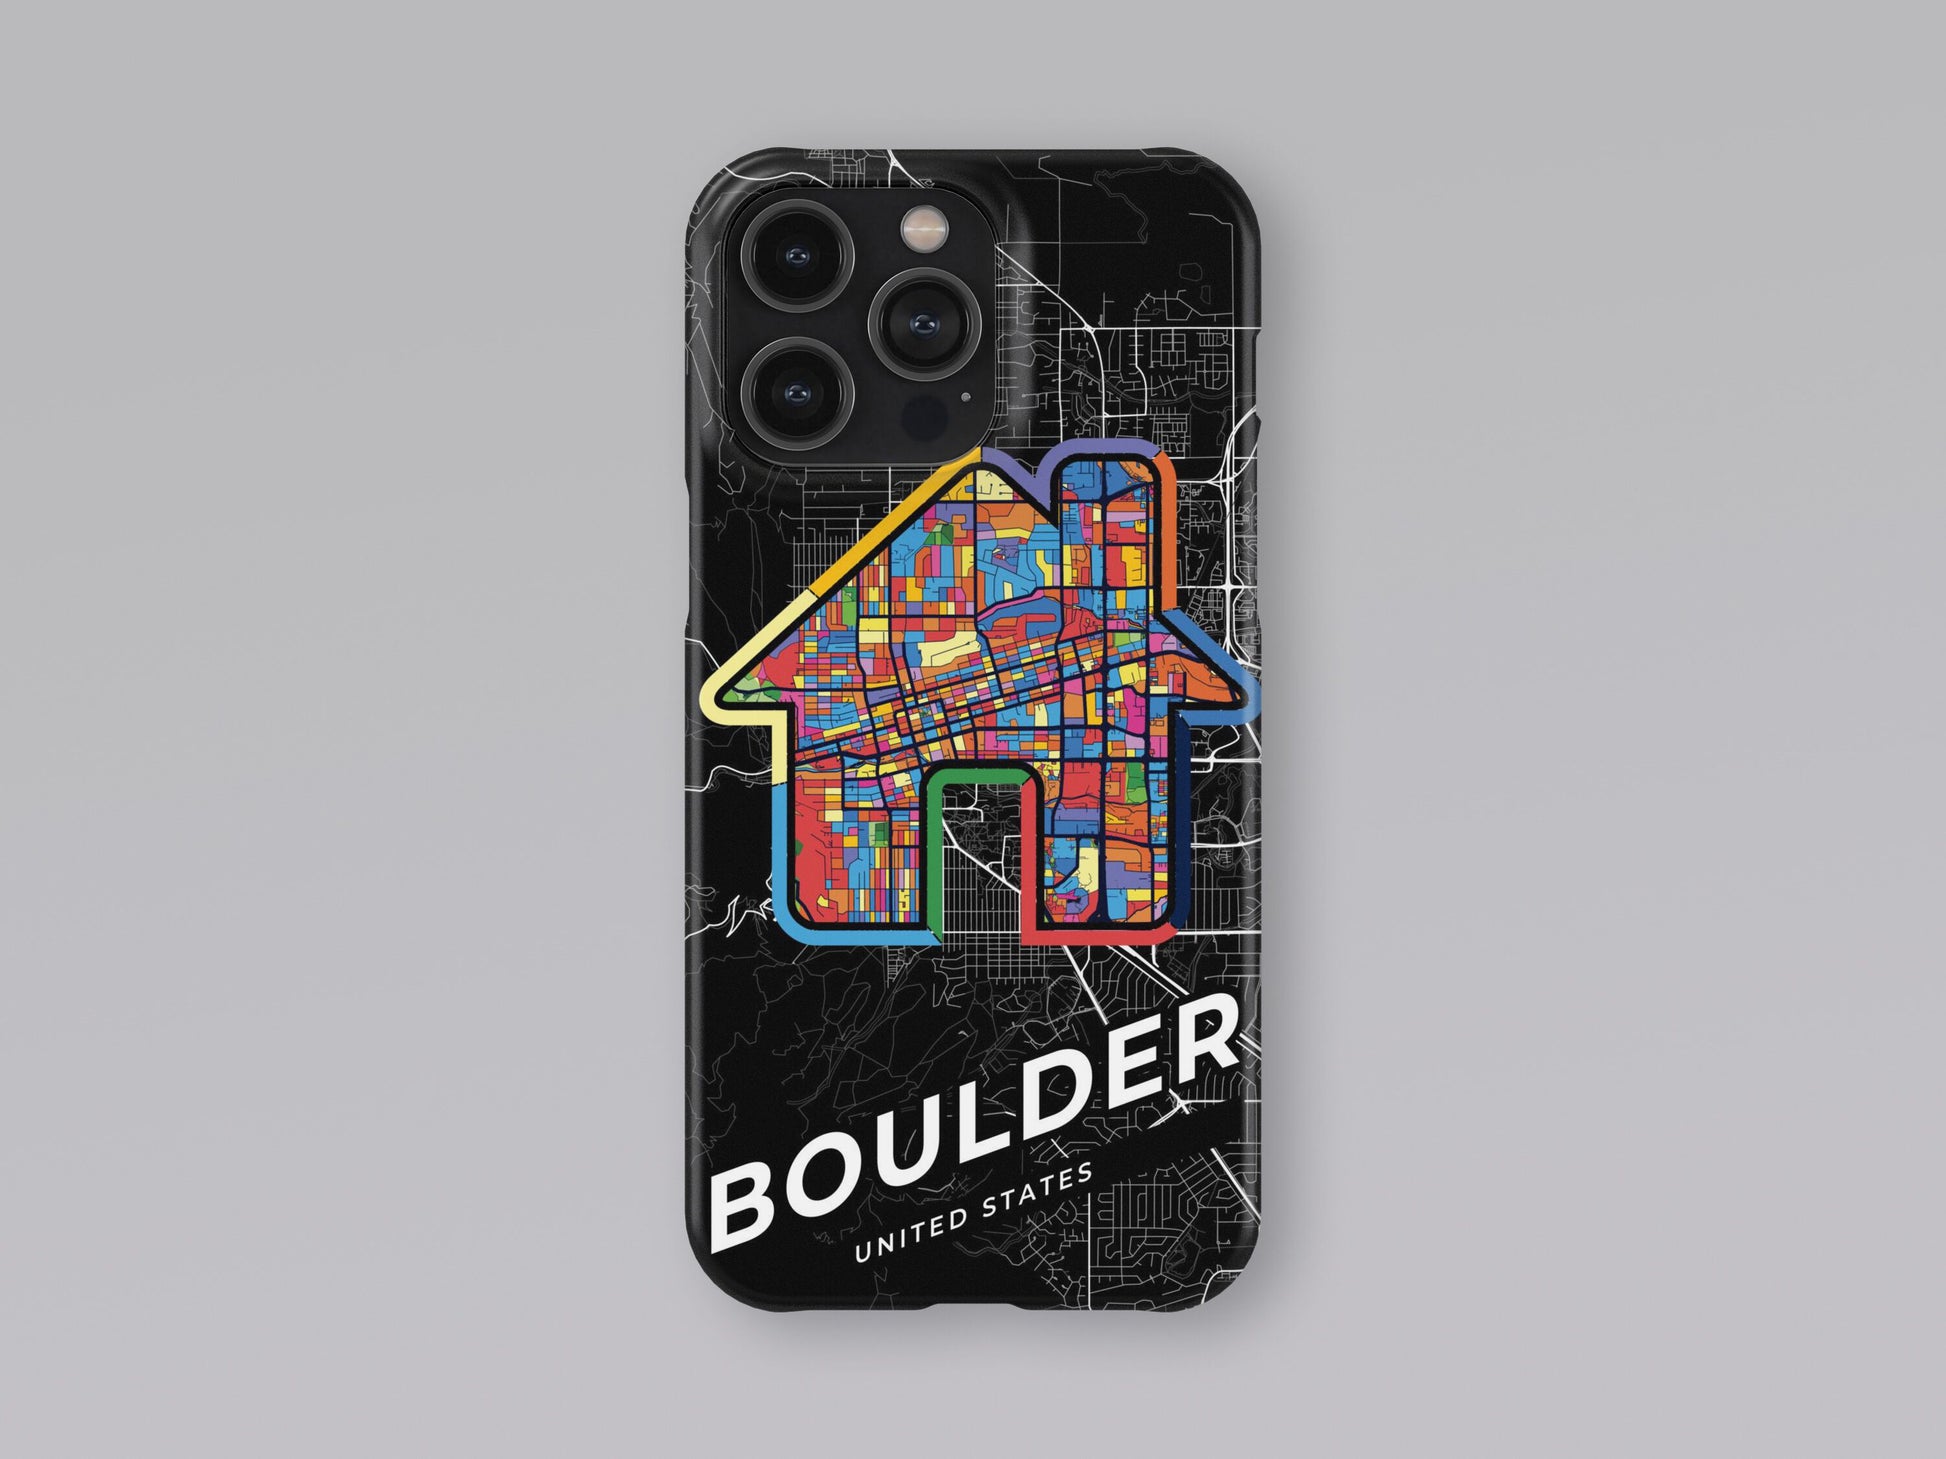 Boulder Colorado slim phone case with colorful icon. Birthday, wedding or housewarming gift. Couple match cases. 3